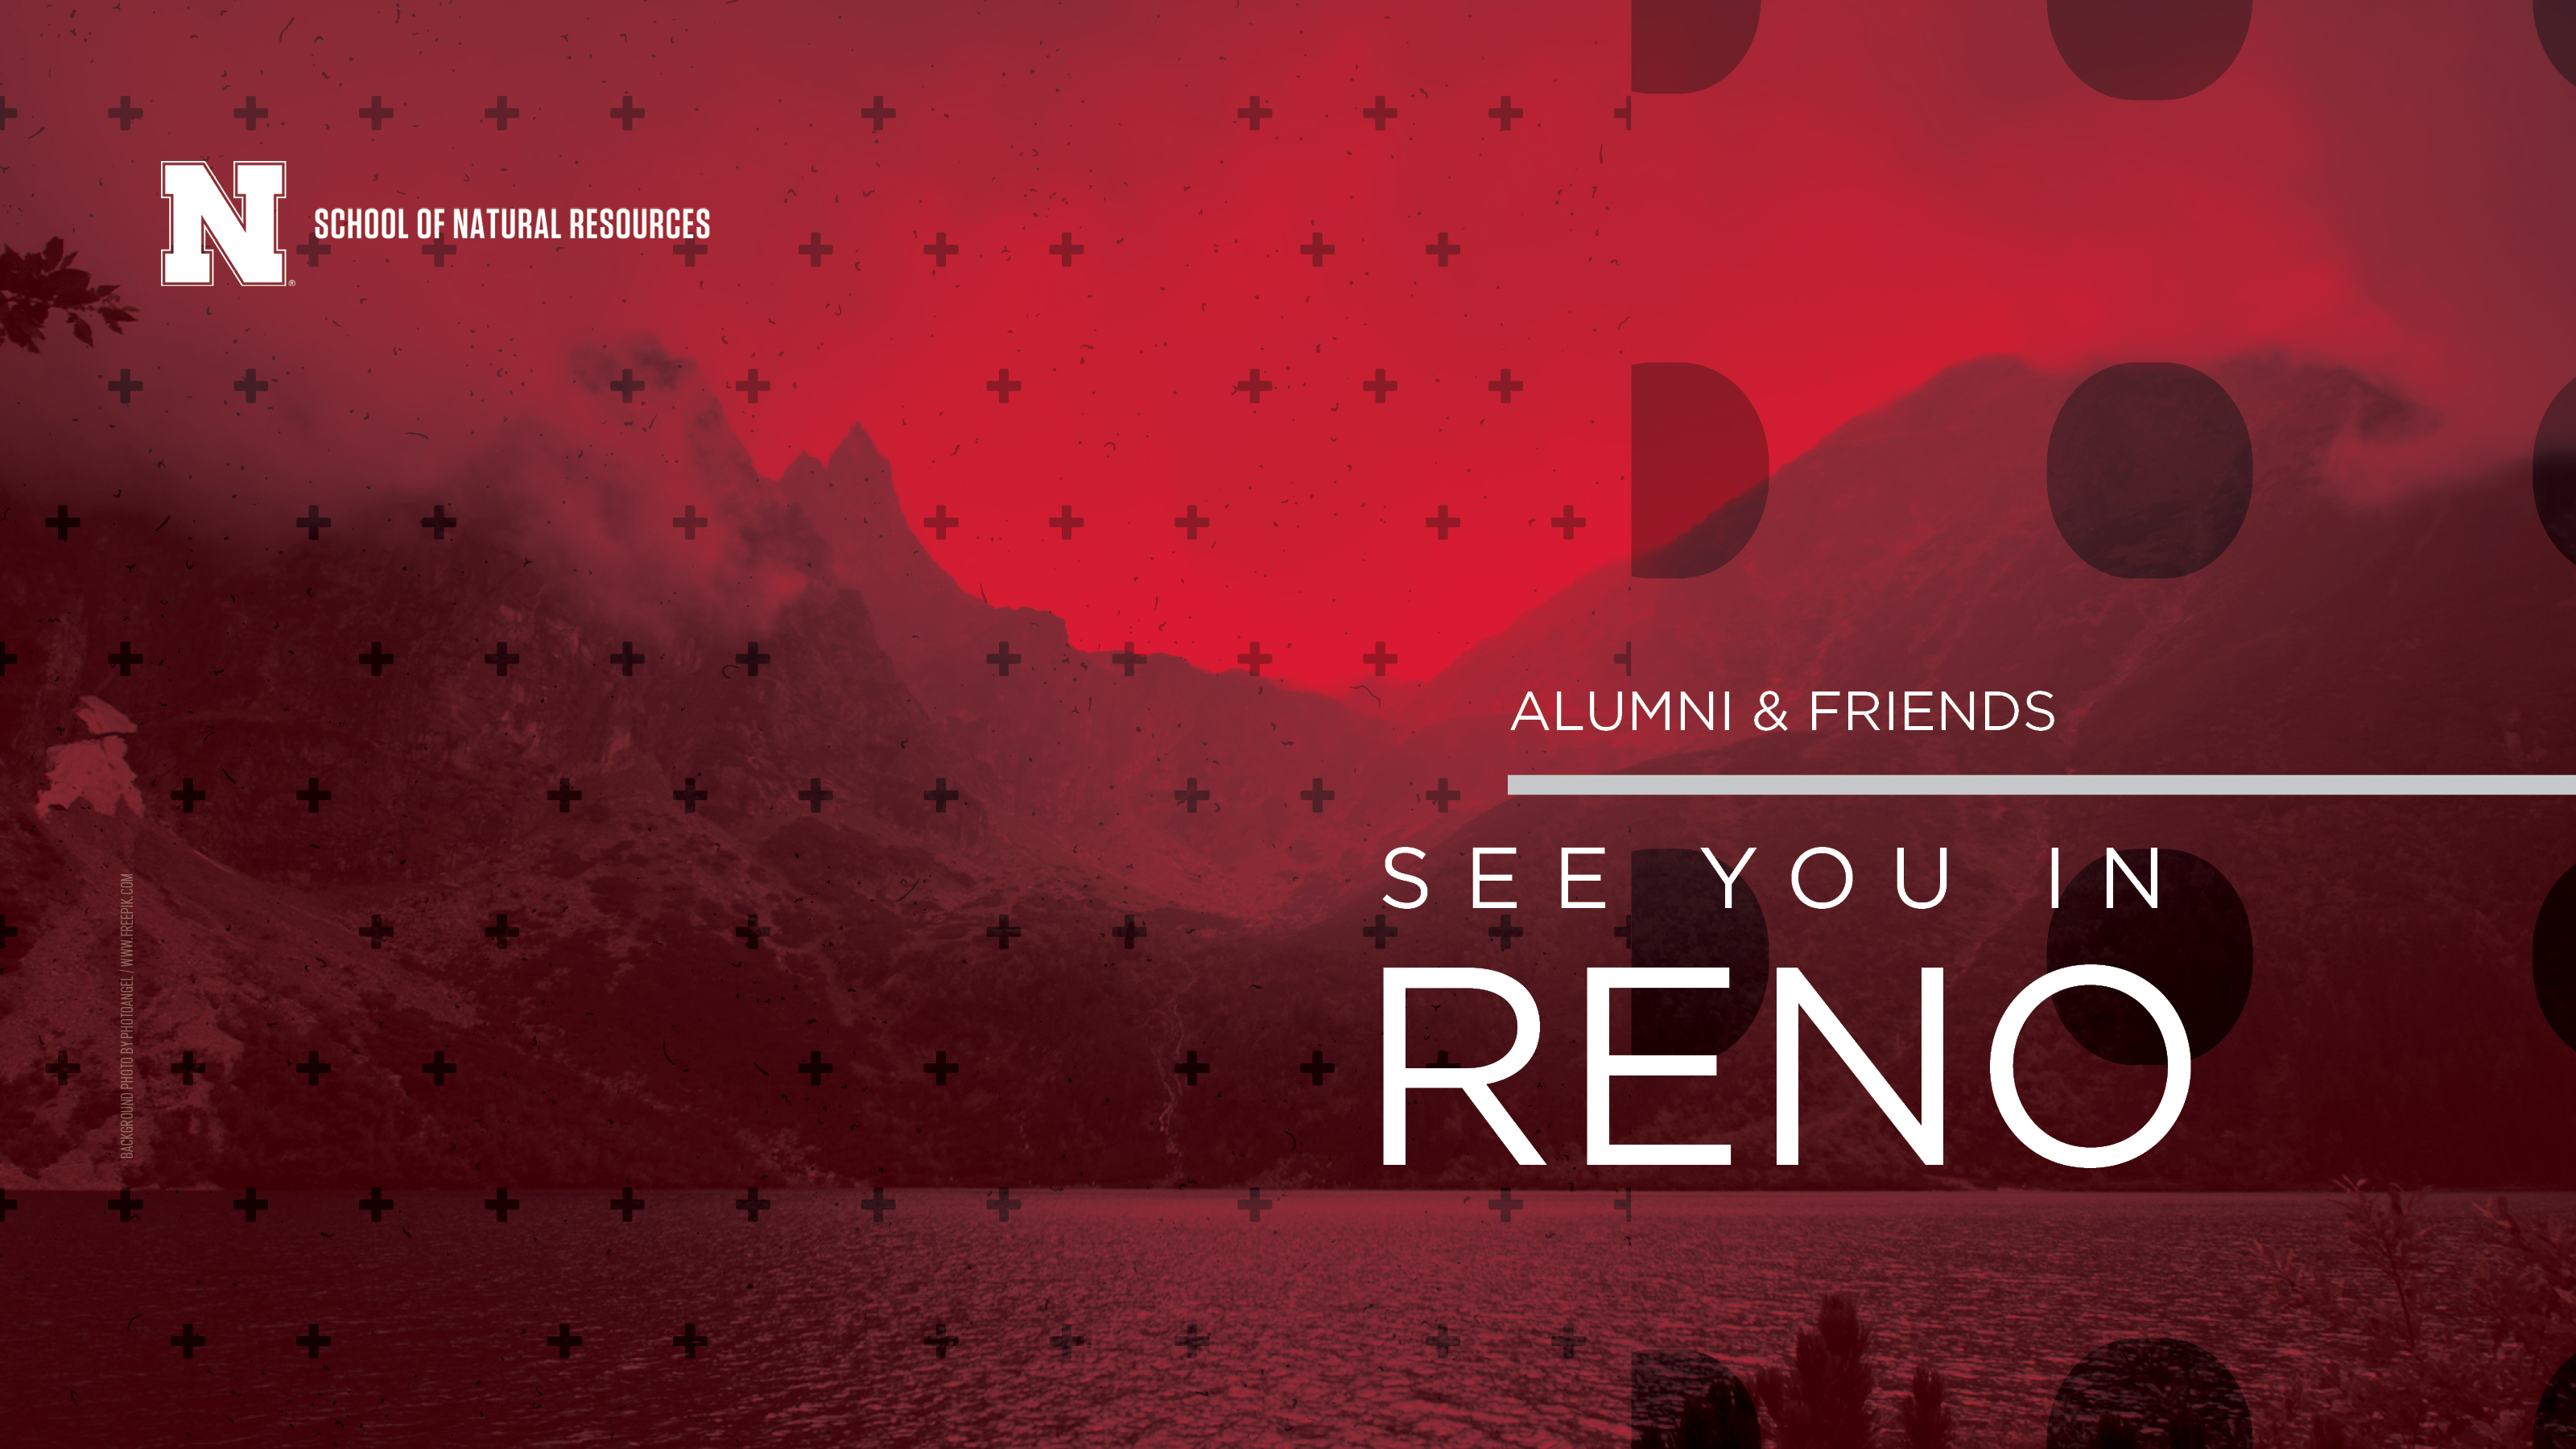 SNR will host an alumni gathering during the 2019 Joint Annual Meeting in Reno, Nevada.